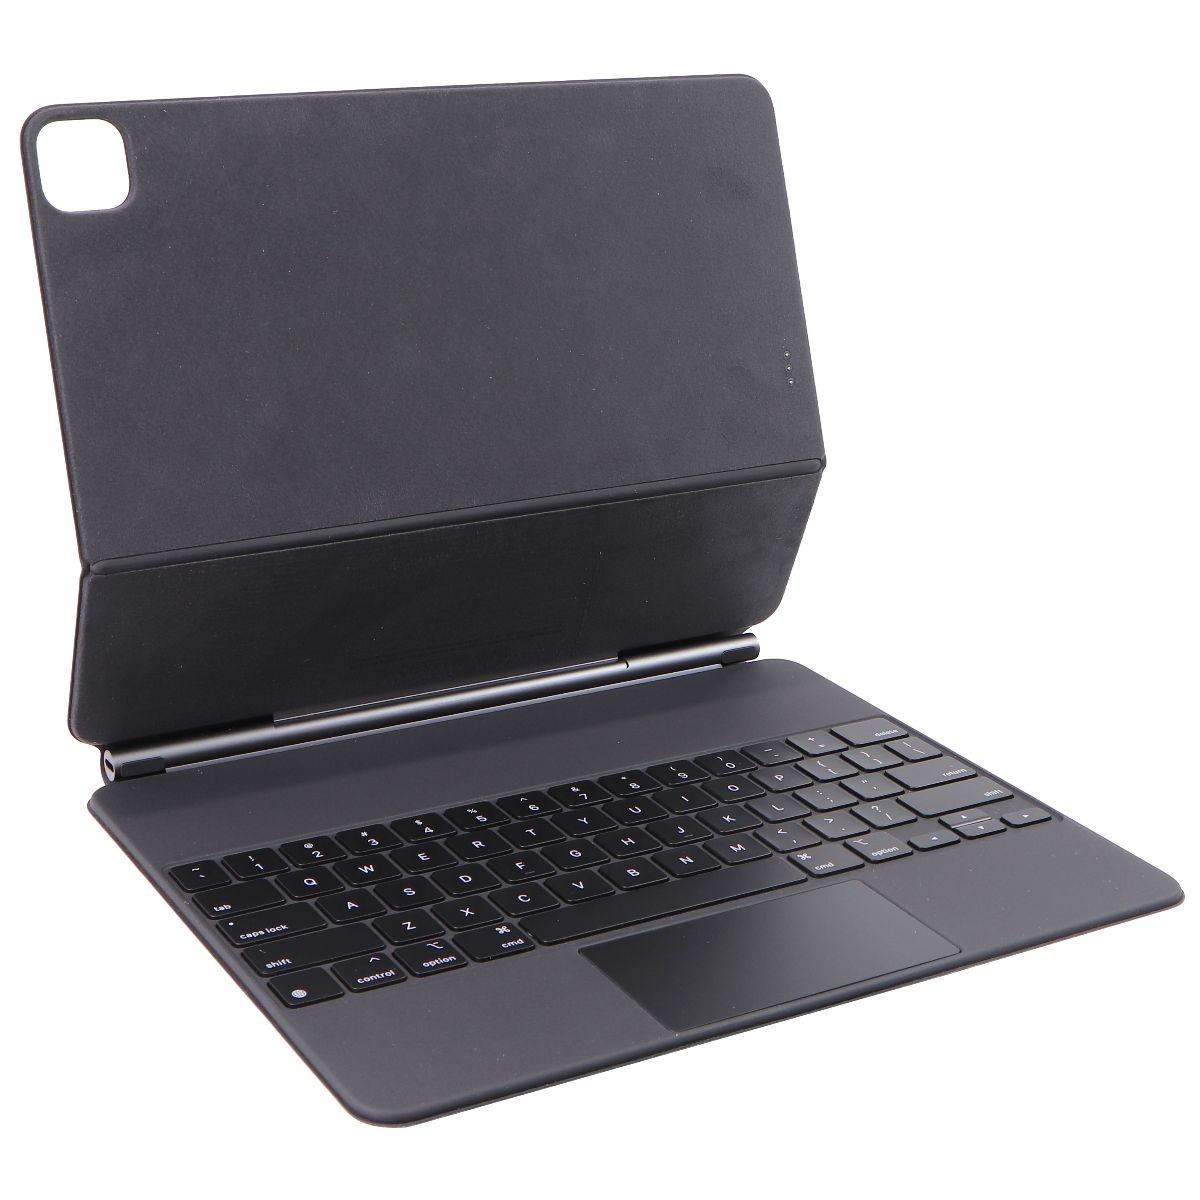 Apple Magic Keyboard (for iPad Pro 12.9-inch - 5th Generation) - Black  MJQK3LL/A - Simple Cell Shop